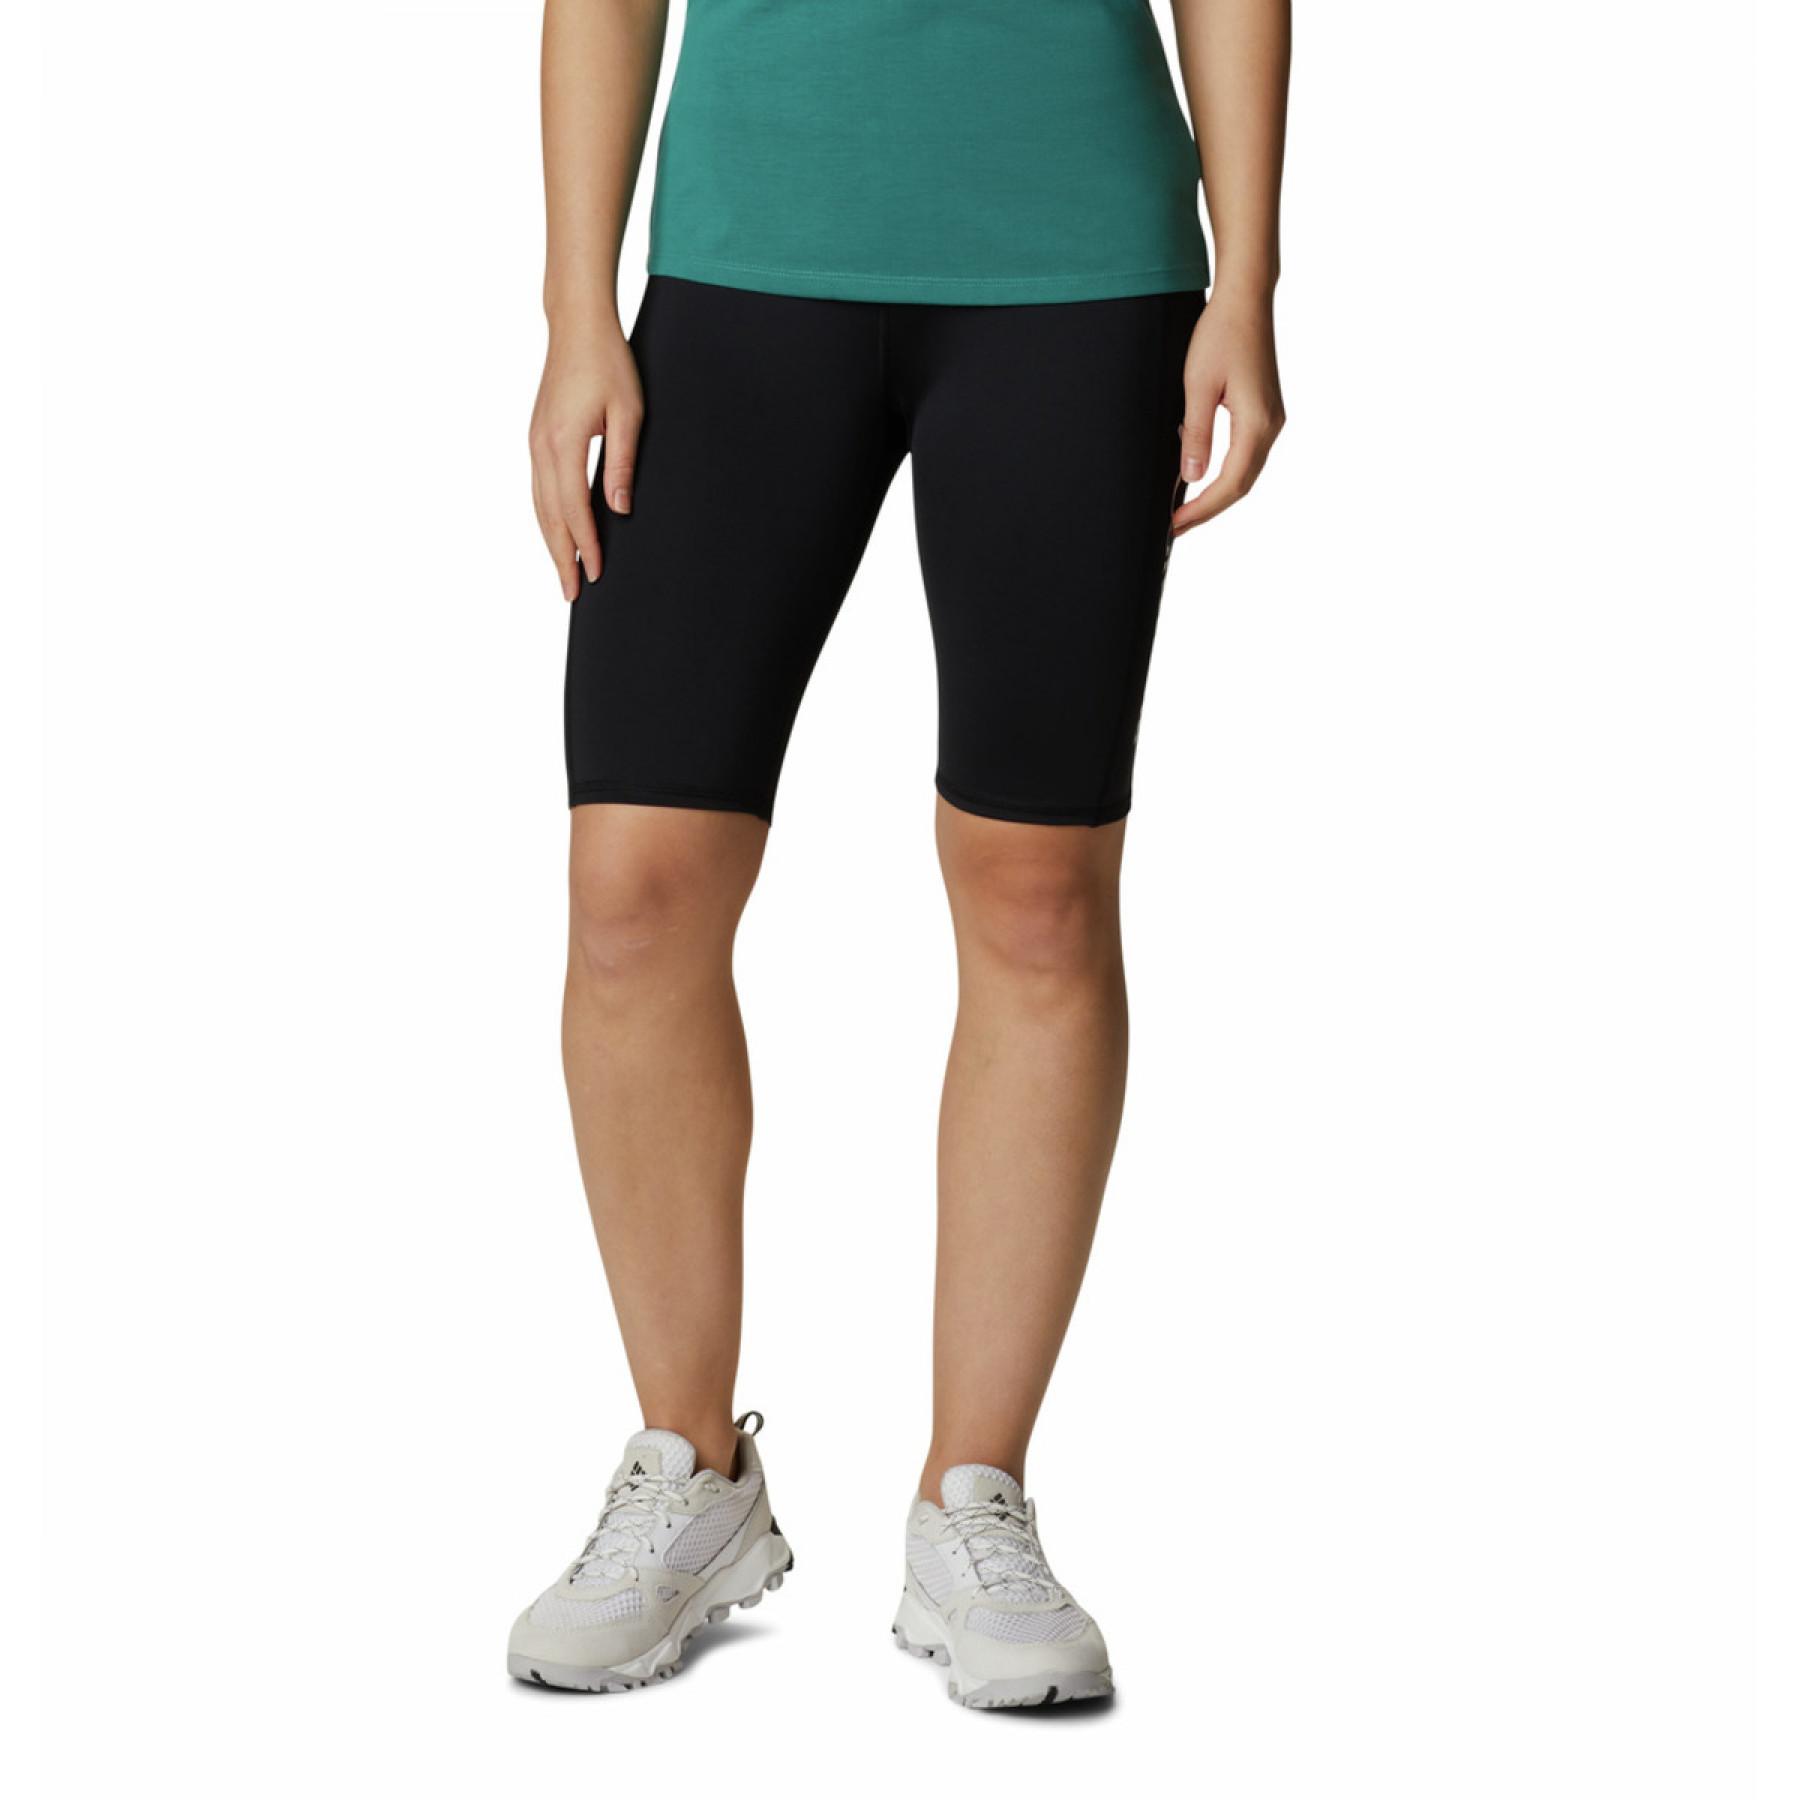 Cuissard femme Columbia River 1/2 Tight